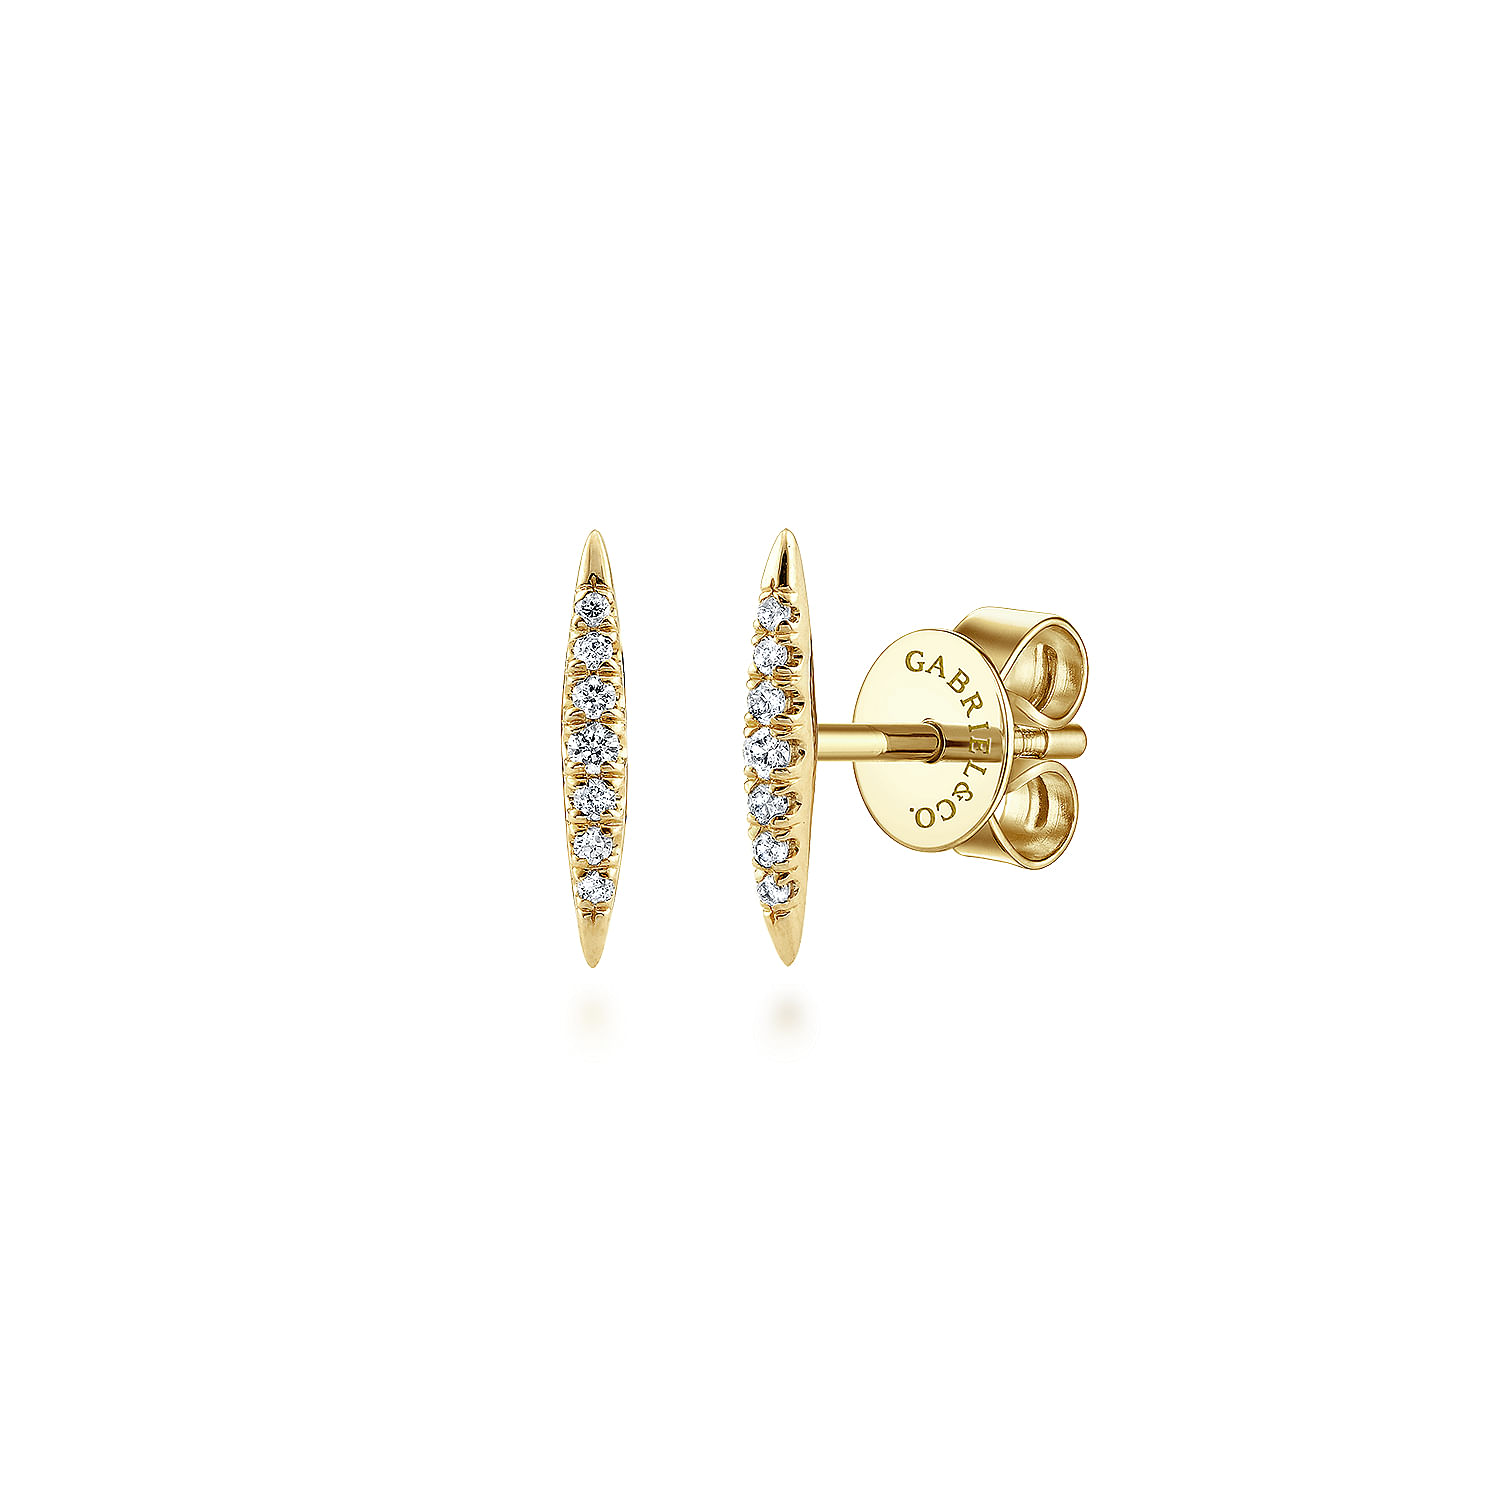 14K-Yellow-Gold-Pave-Diamond-Spiked-Stud-Earrings1